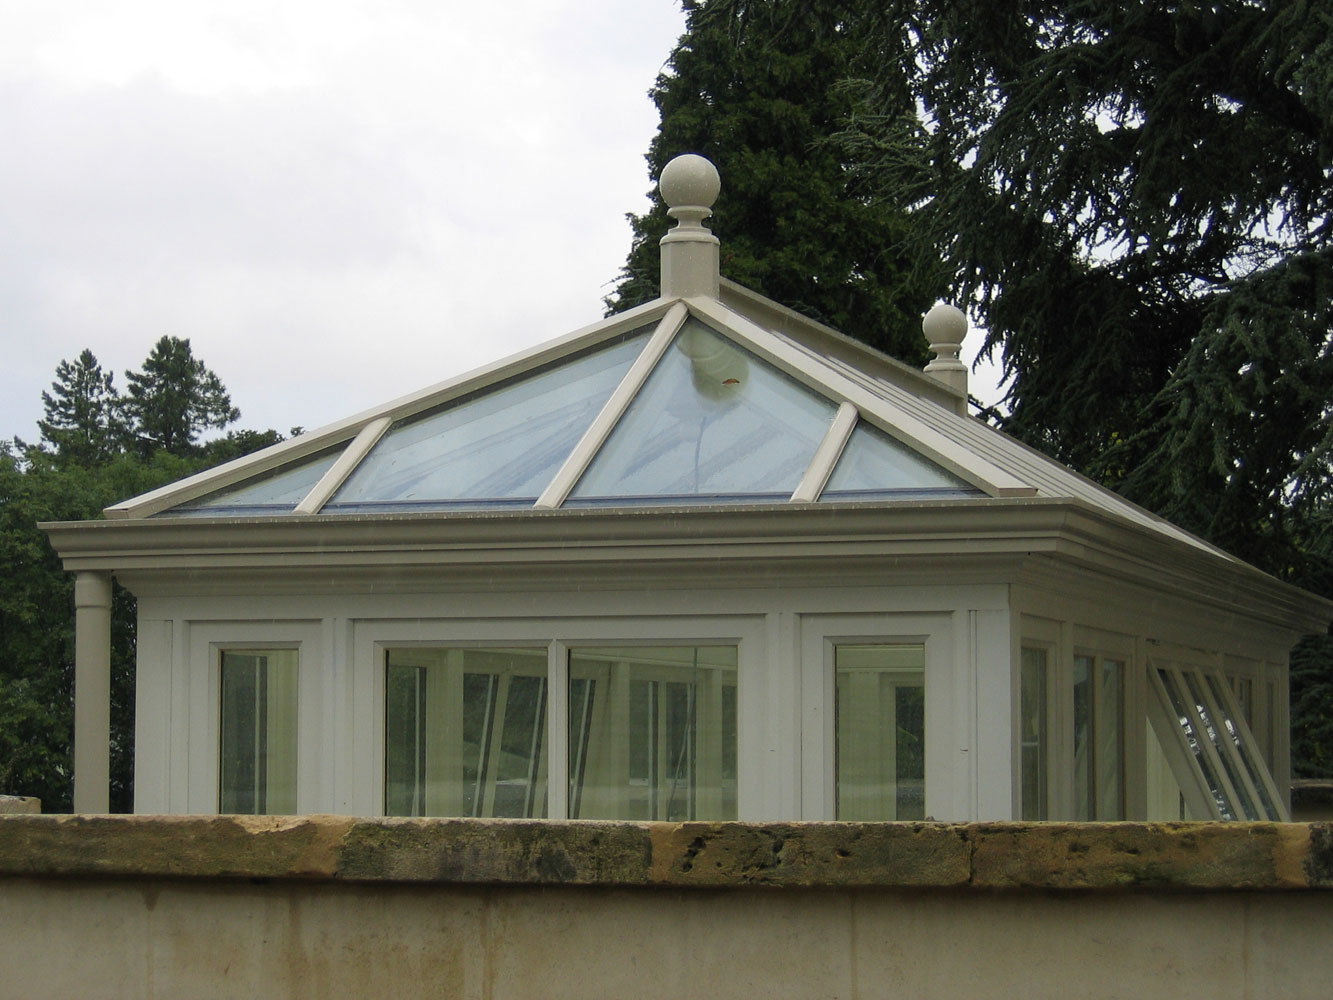 End elevation of a roof lantern with side frames